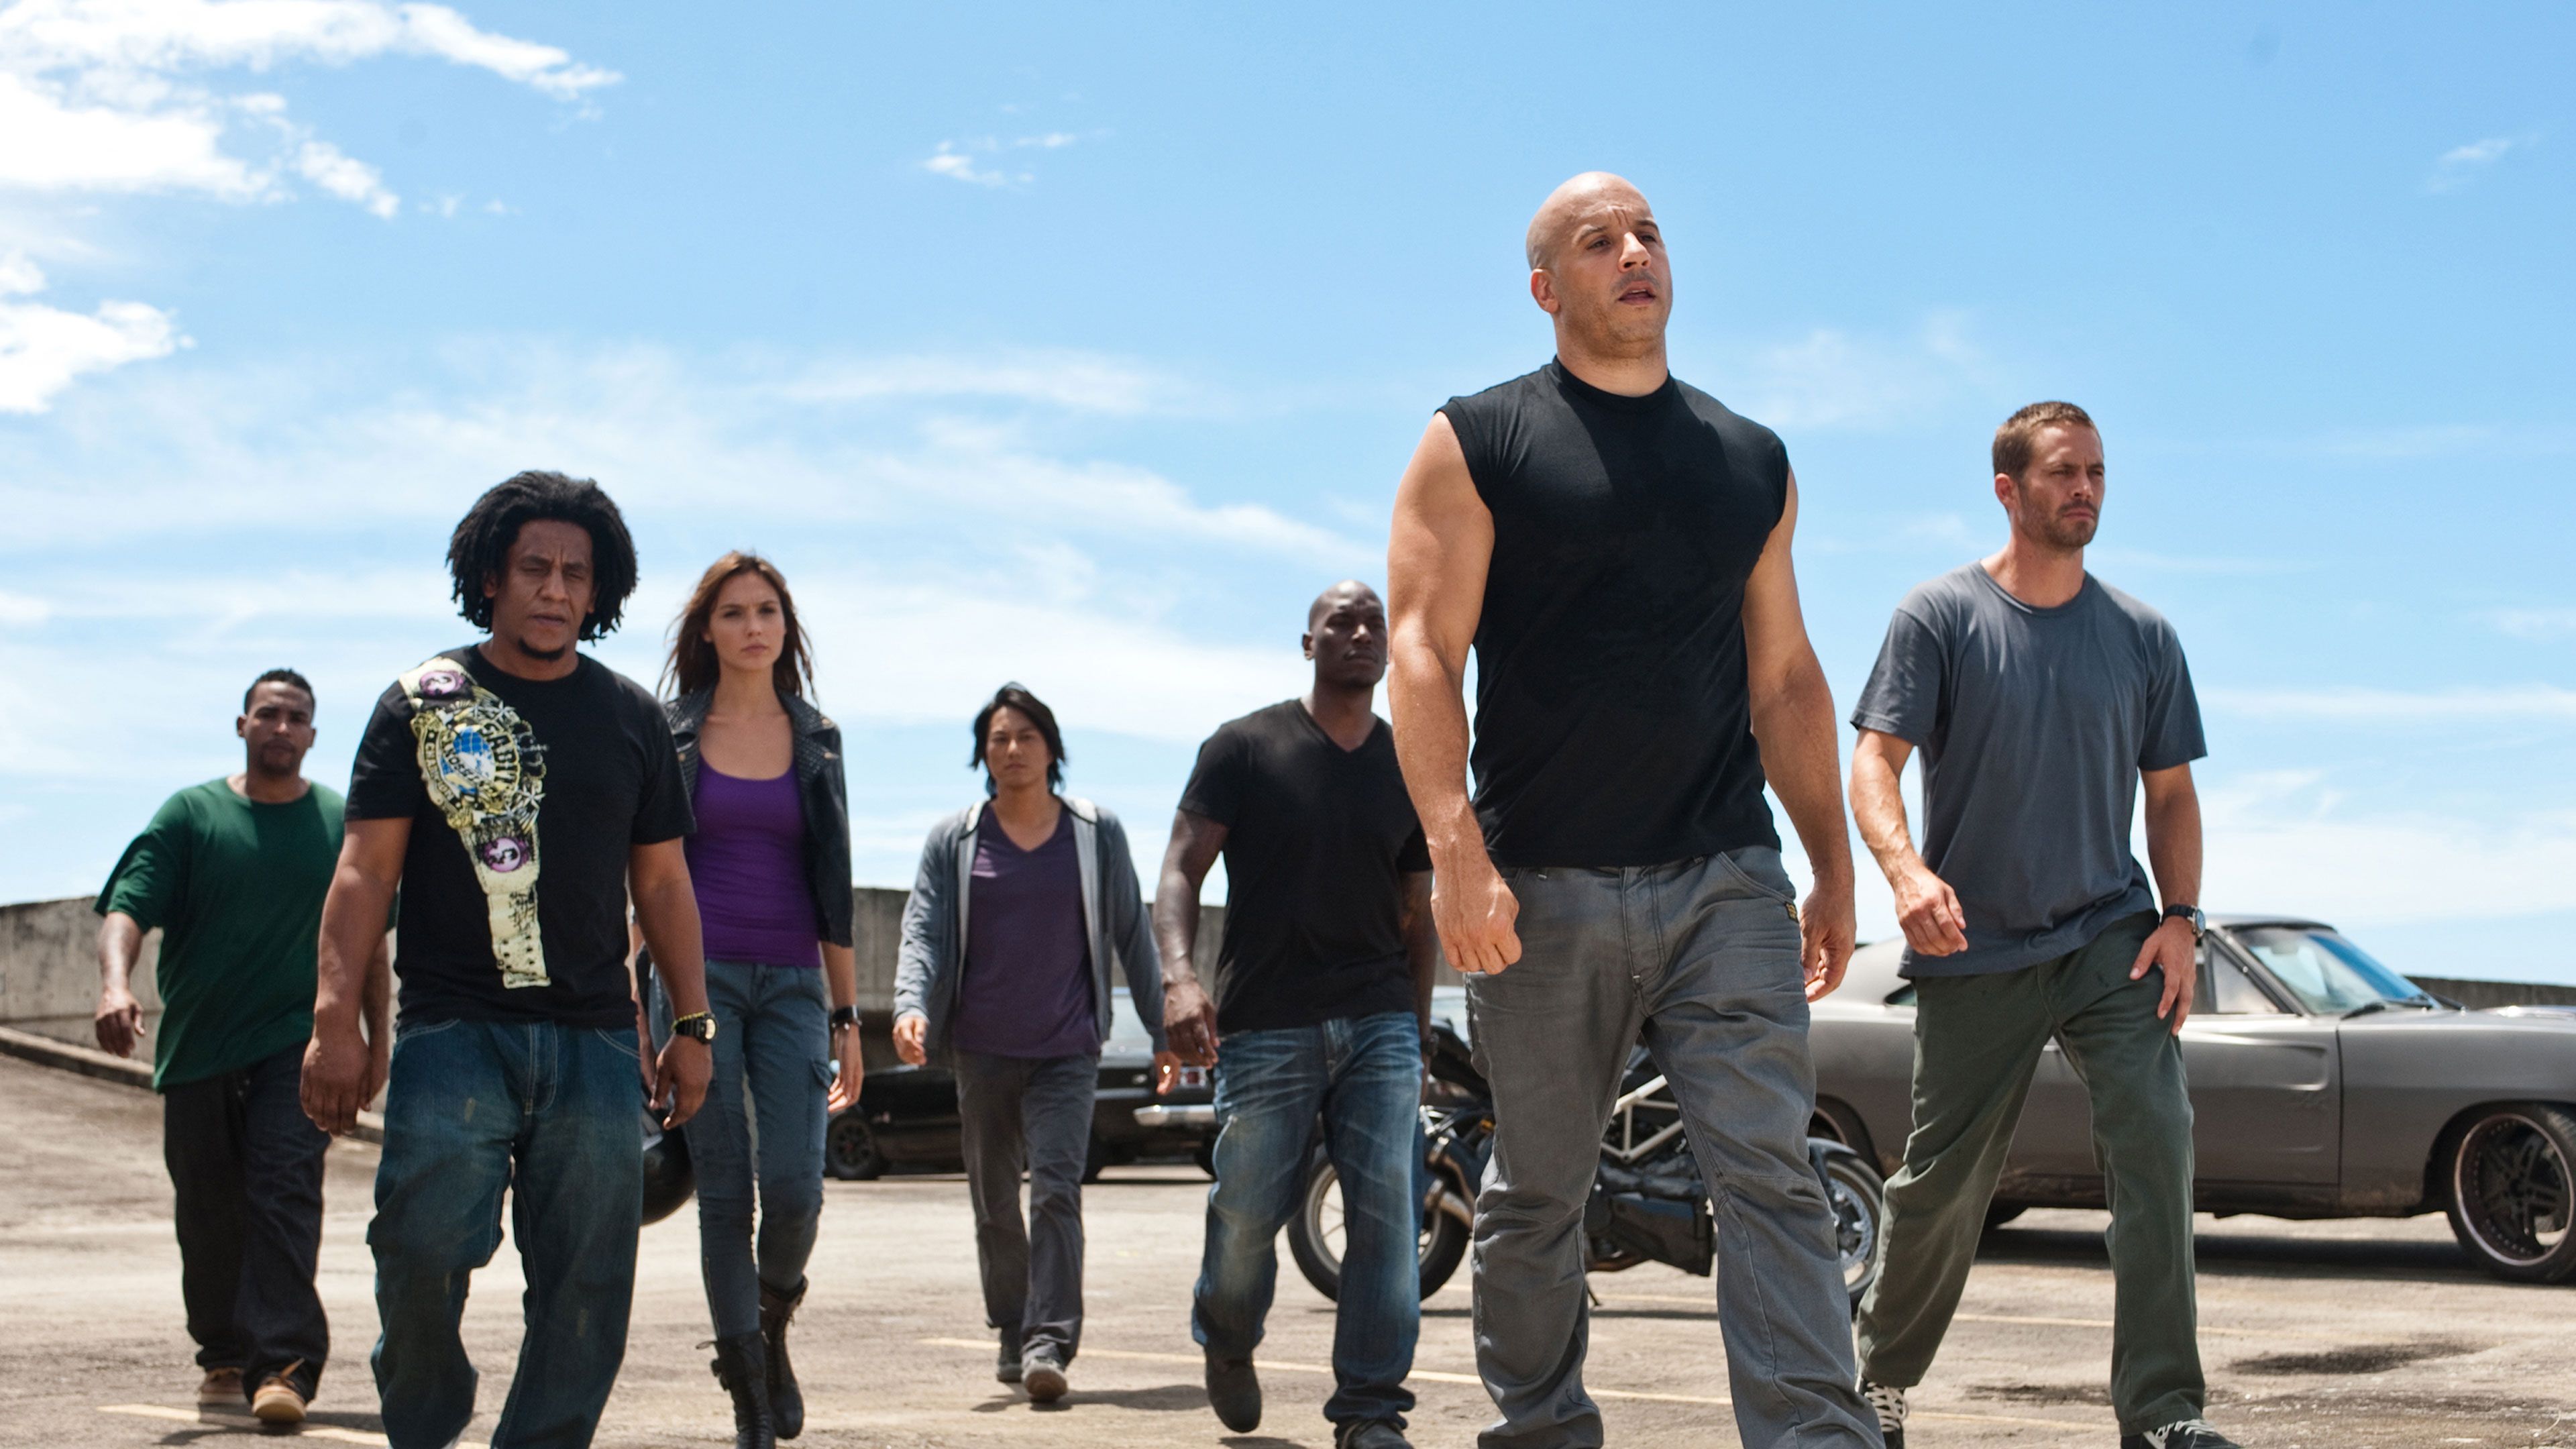 where can i watch fast and furious 4 online for free